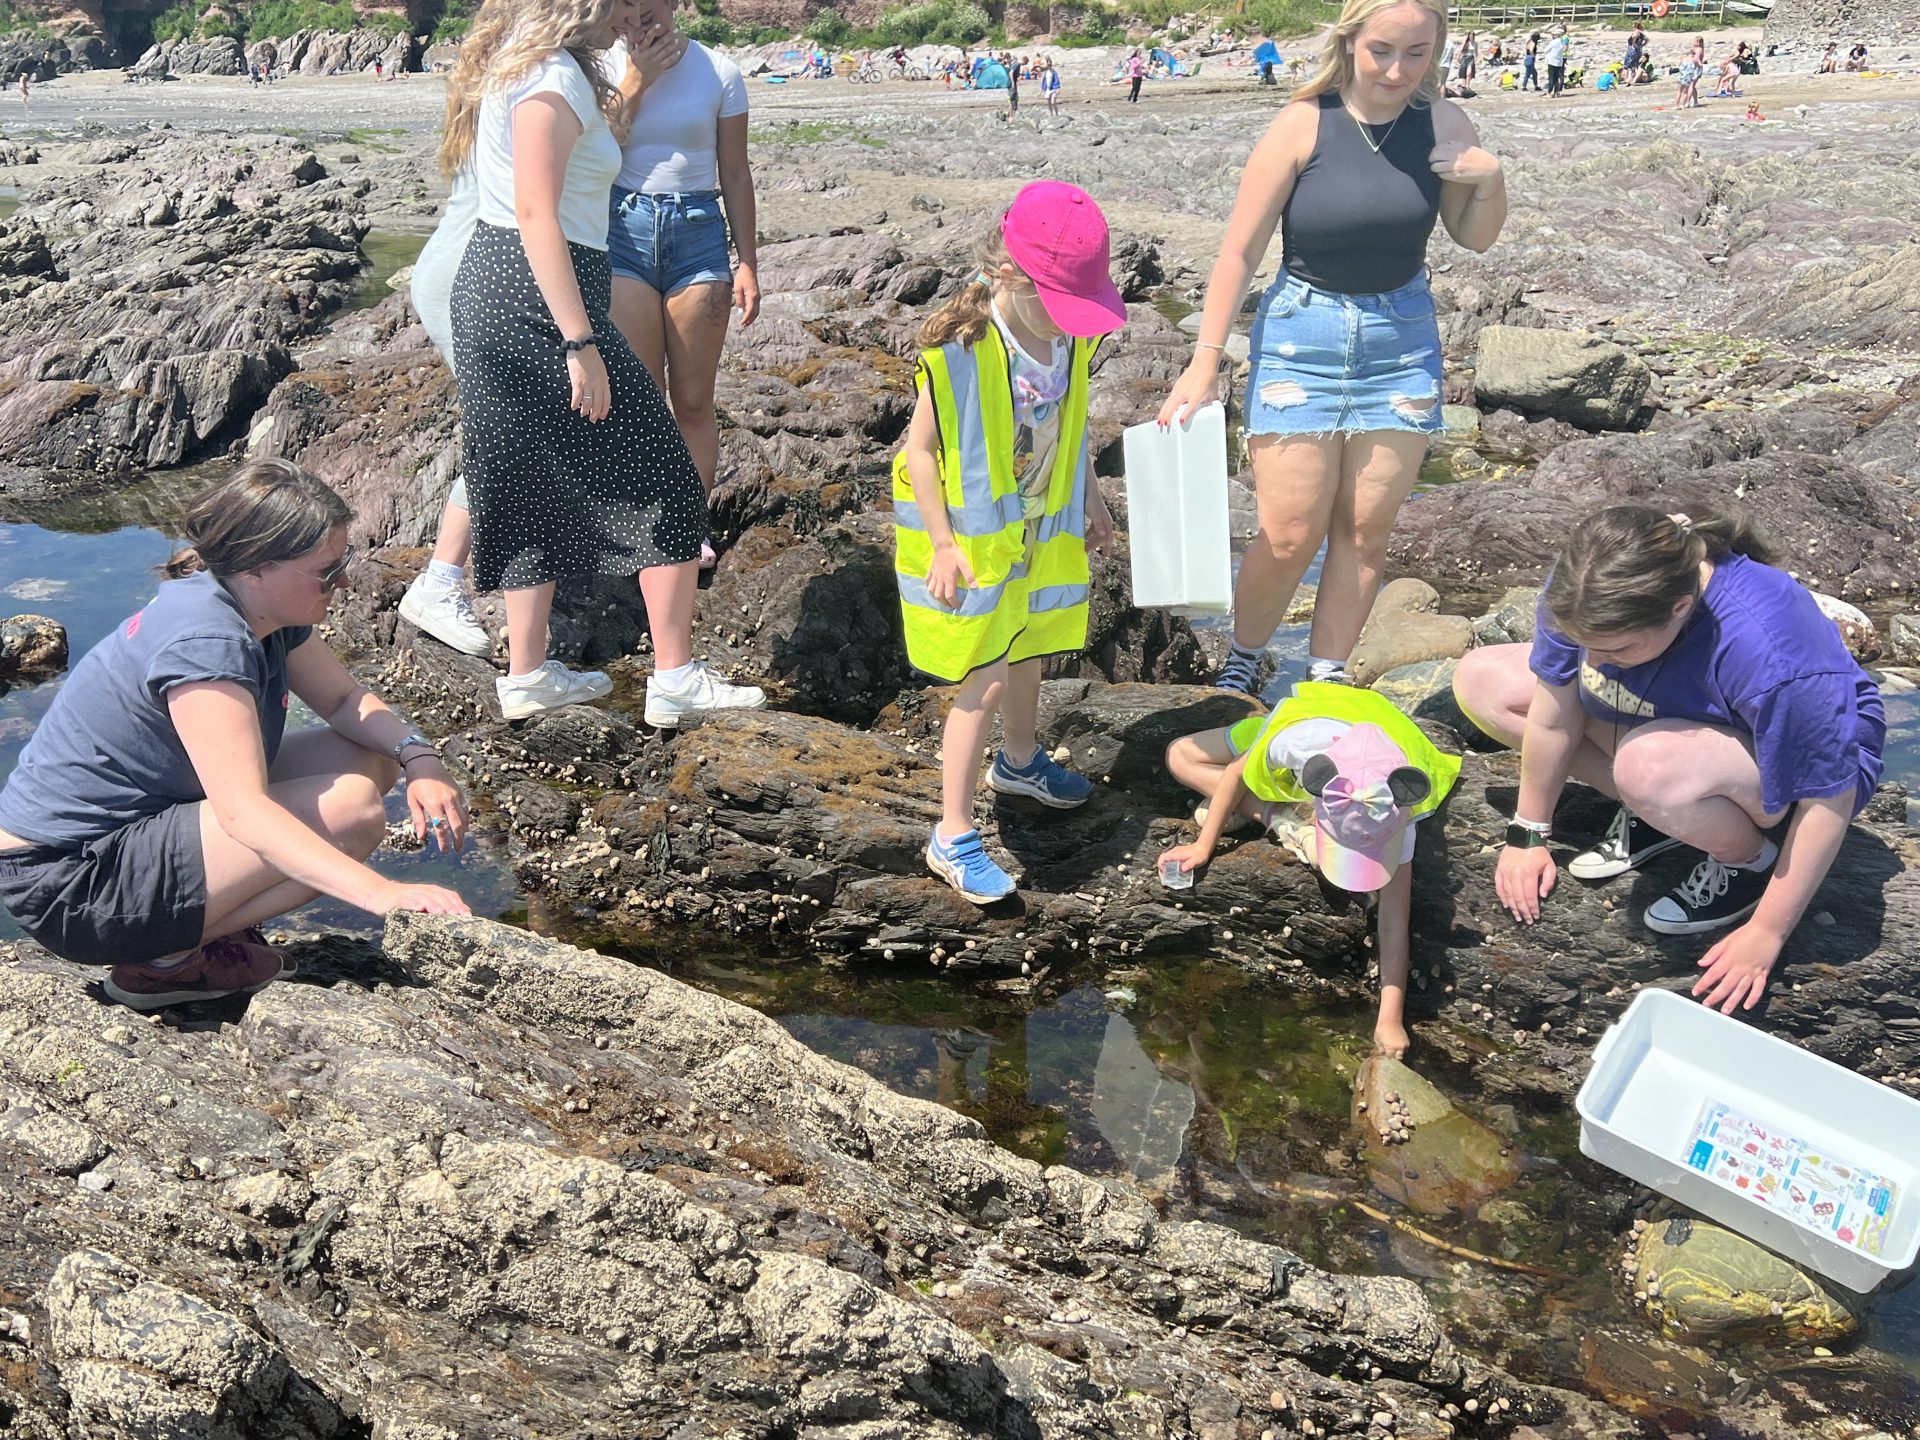 Rockpooling at our learning outreach program 